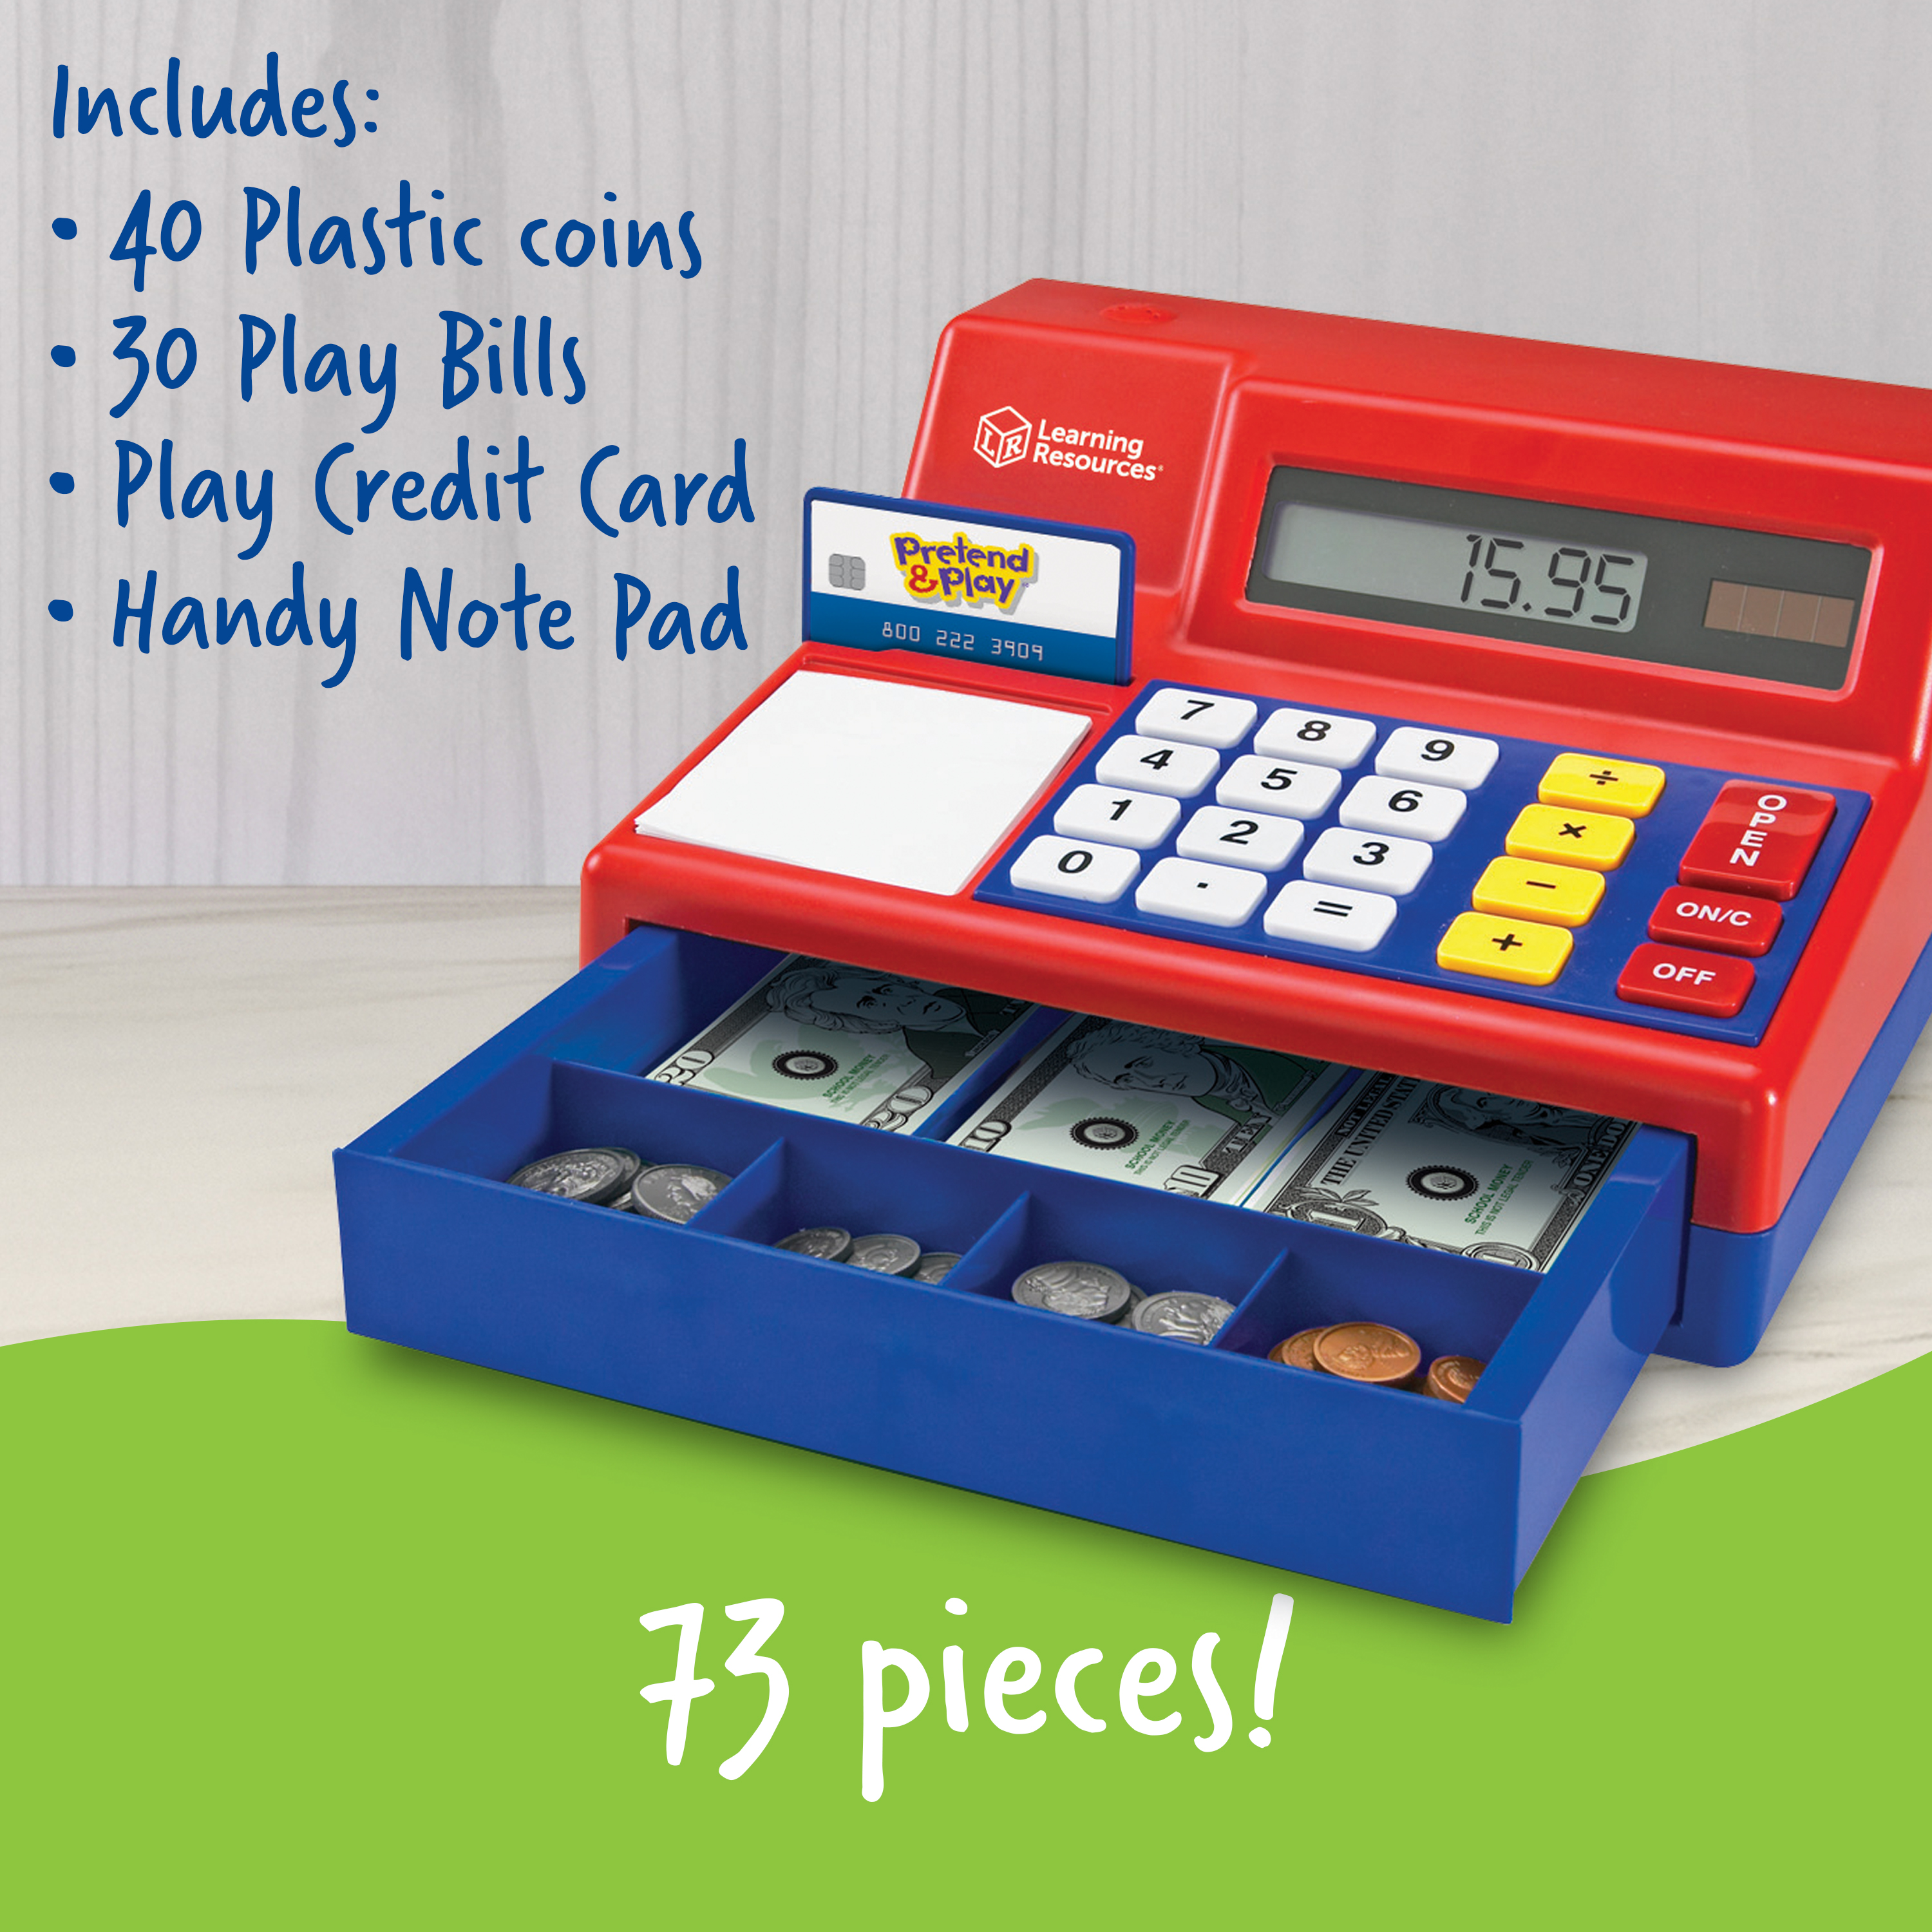 Learning Resources Pretend & Play Calculator Cash Register, Educational Learning Preschool Play Cash Register Toy for Girls and Boys, Sustainable Toys Ages 3 4 5+ - image 4 of 9